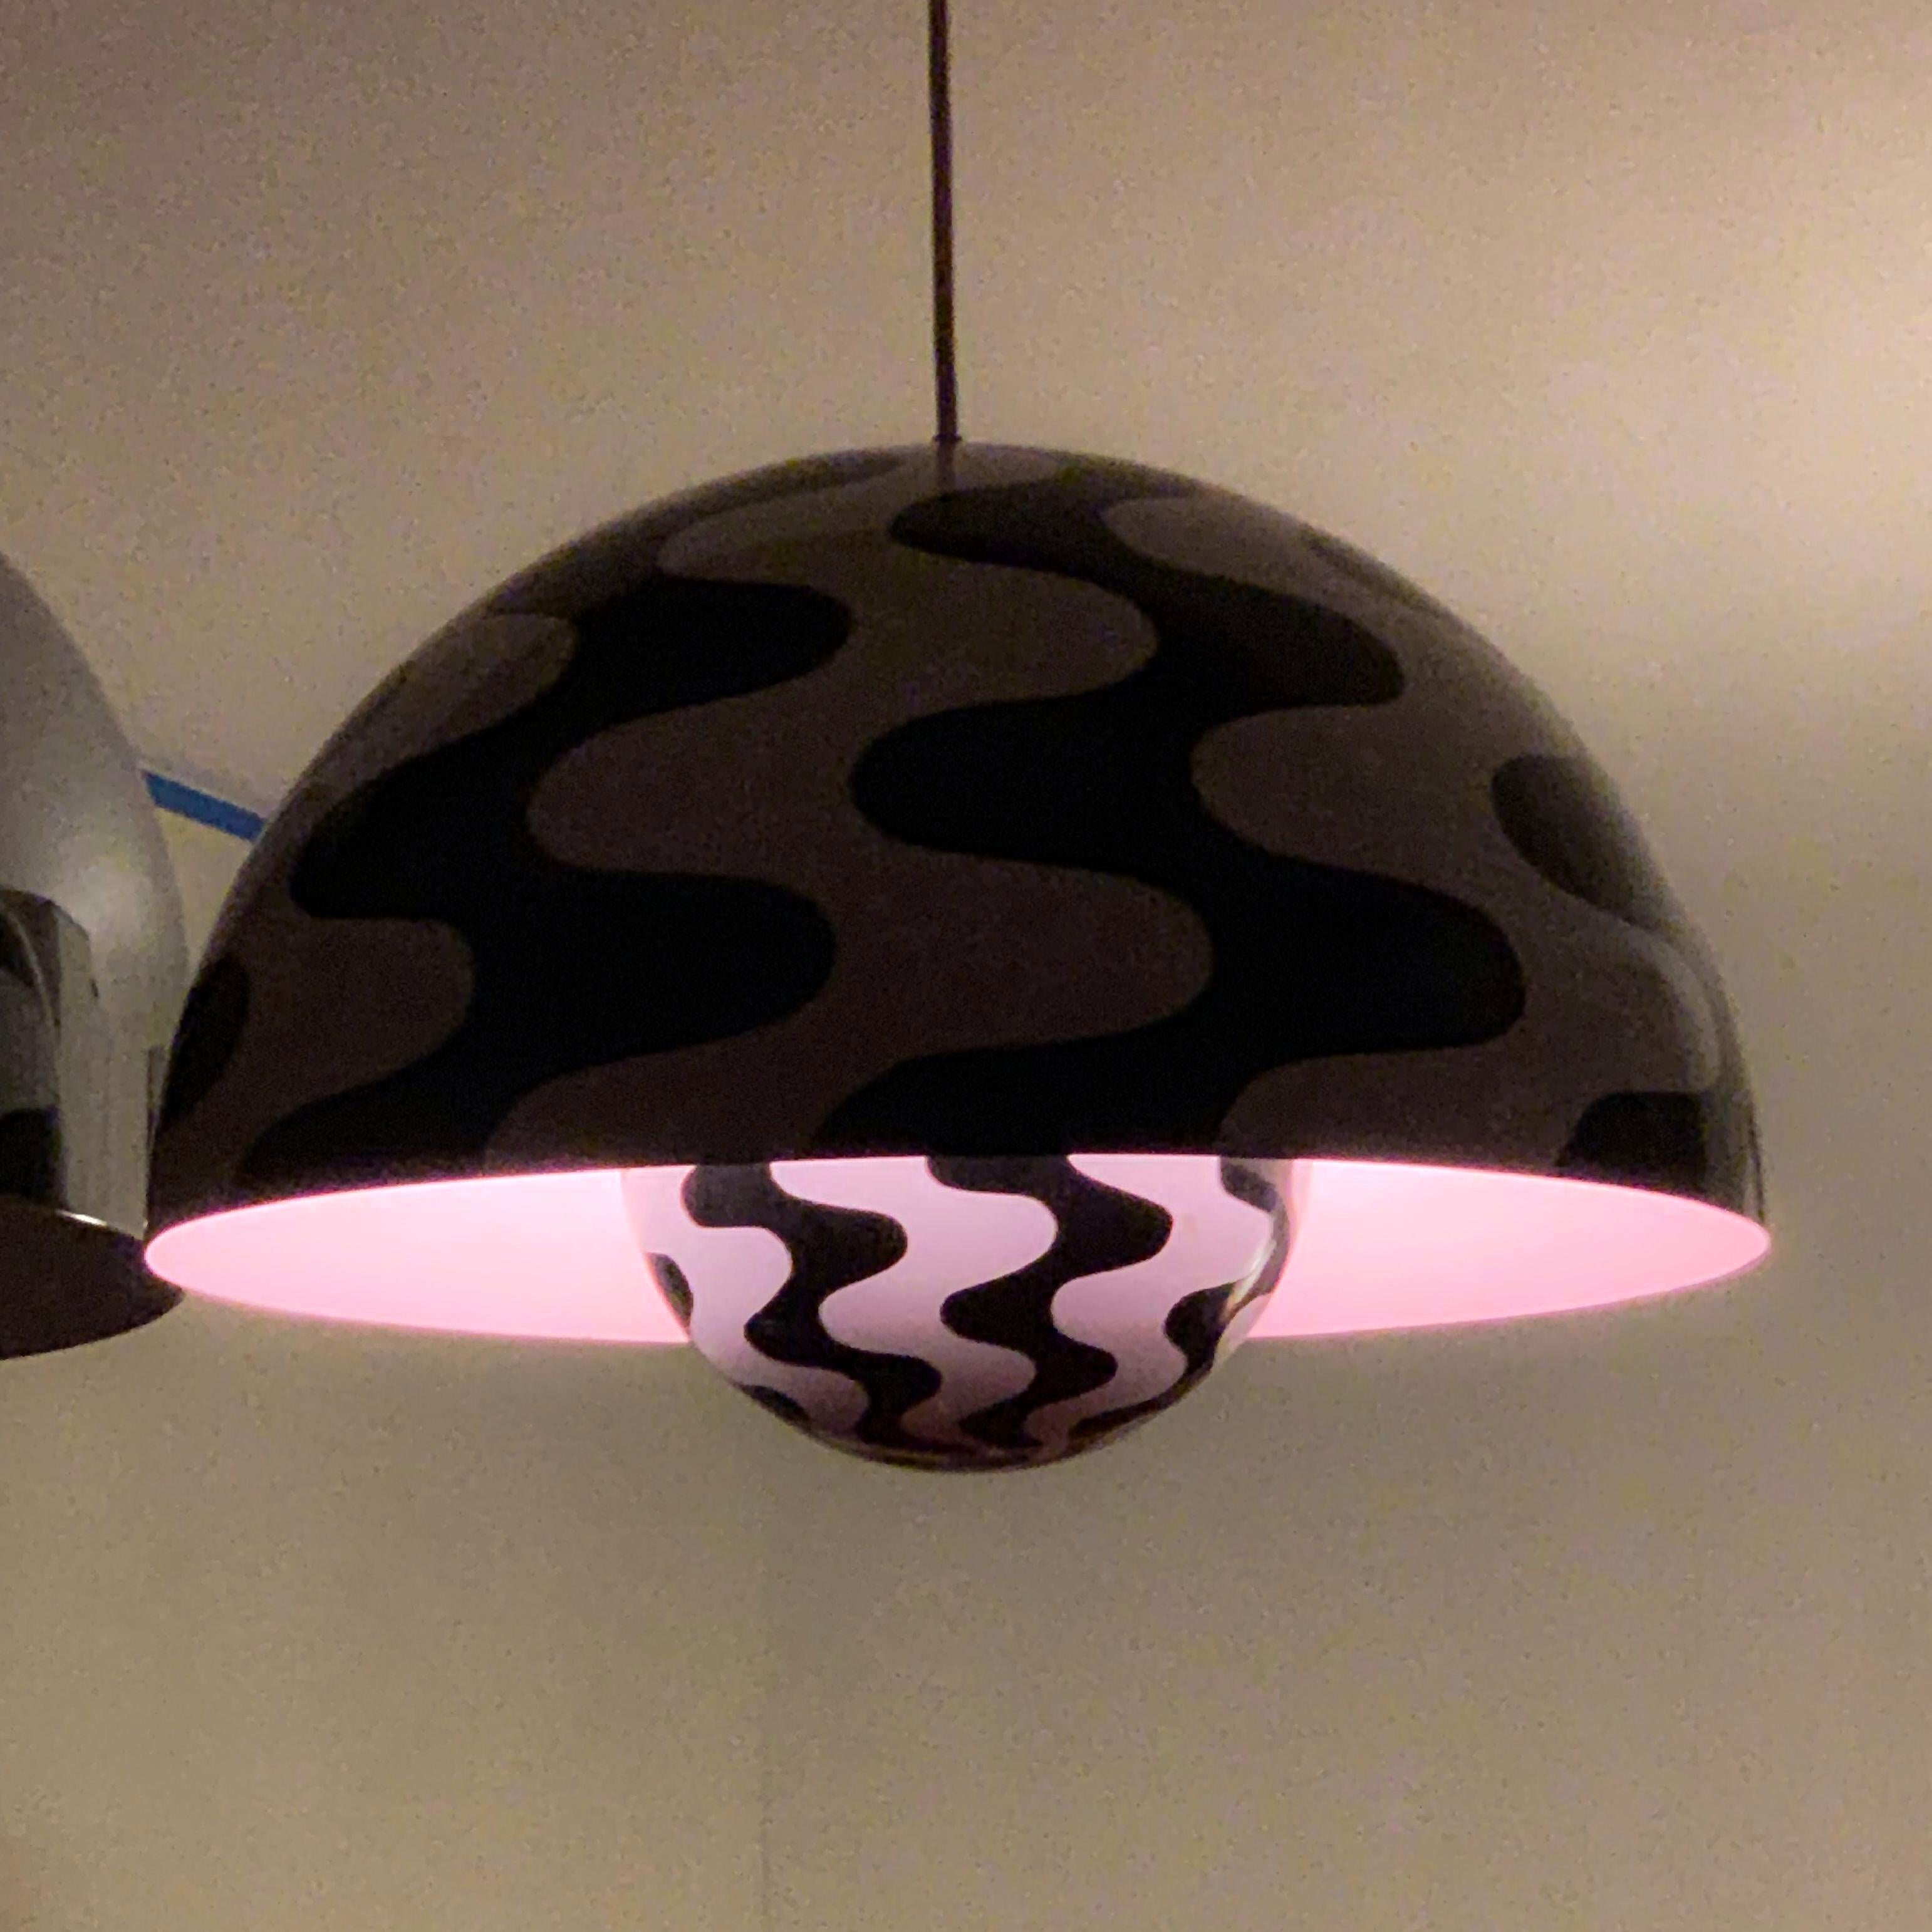 Verner Panton Scandinavian Modern Black & White Flowerpot Pendant Space Age Mod 
Extremely rare large scale Verner Panton Black white flower pot. Retains 'made in Denmark' label on fixture. Produced for only one season (as far as I've been able to